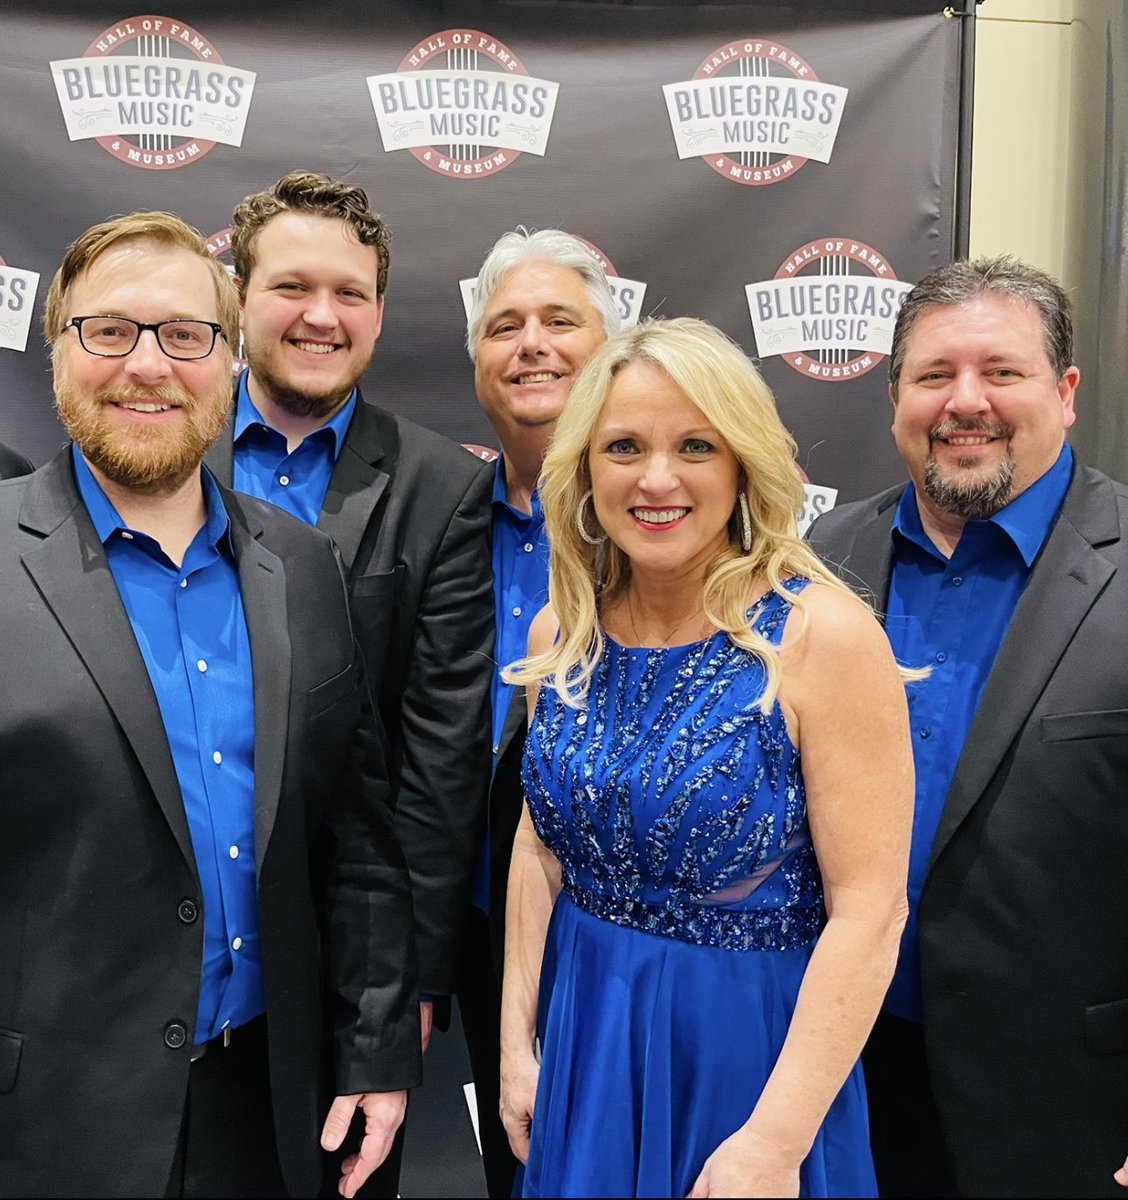 I’ll be at the Grand Ole @opry opry.com tonight with these Rage members. We have a mystery guest resophonic guitar player with us tonight. Can you guess who will be playing with us LIVE @WSMradio & @SIRIUSXM ??